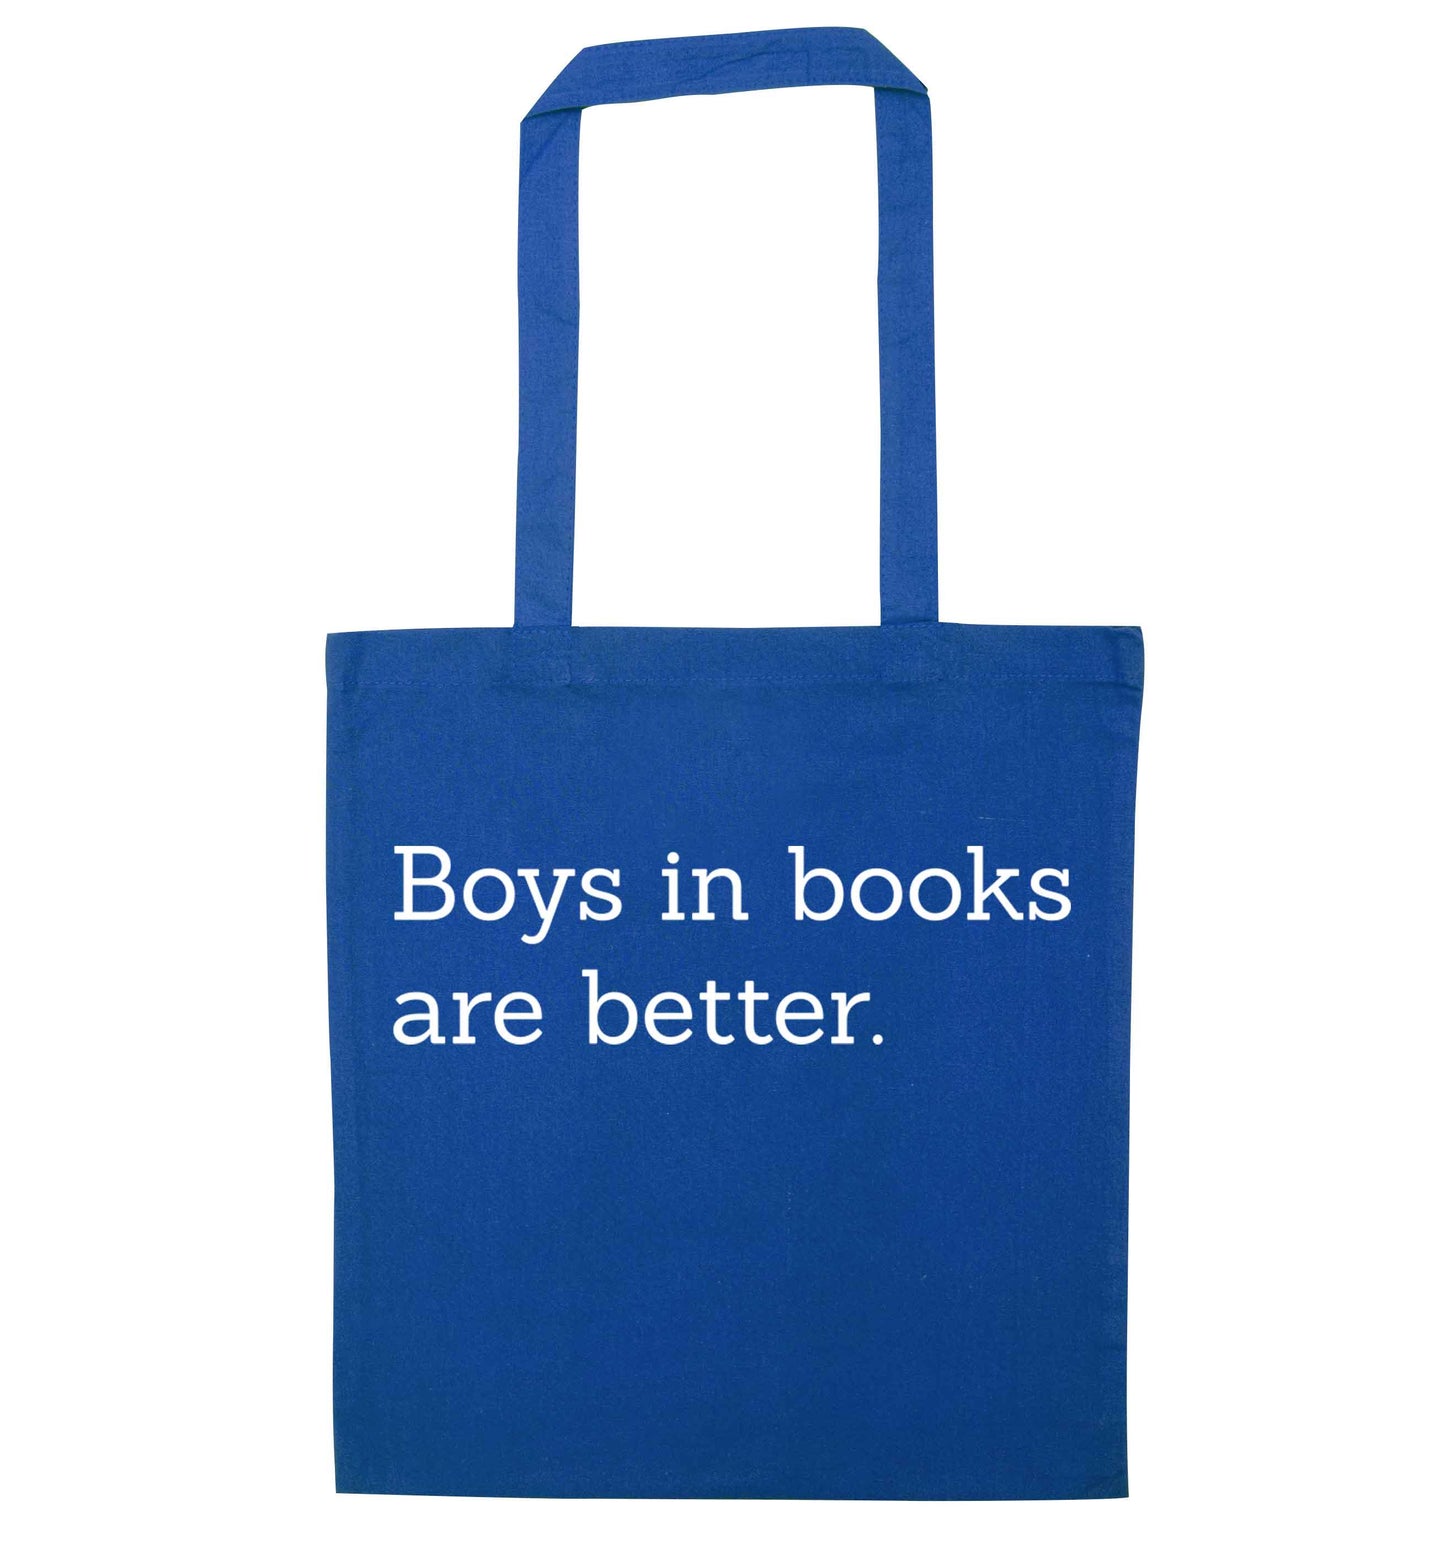 Boys in books are better blue tote bag